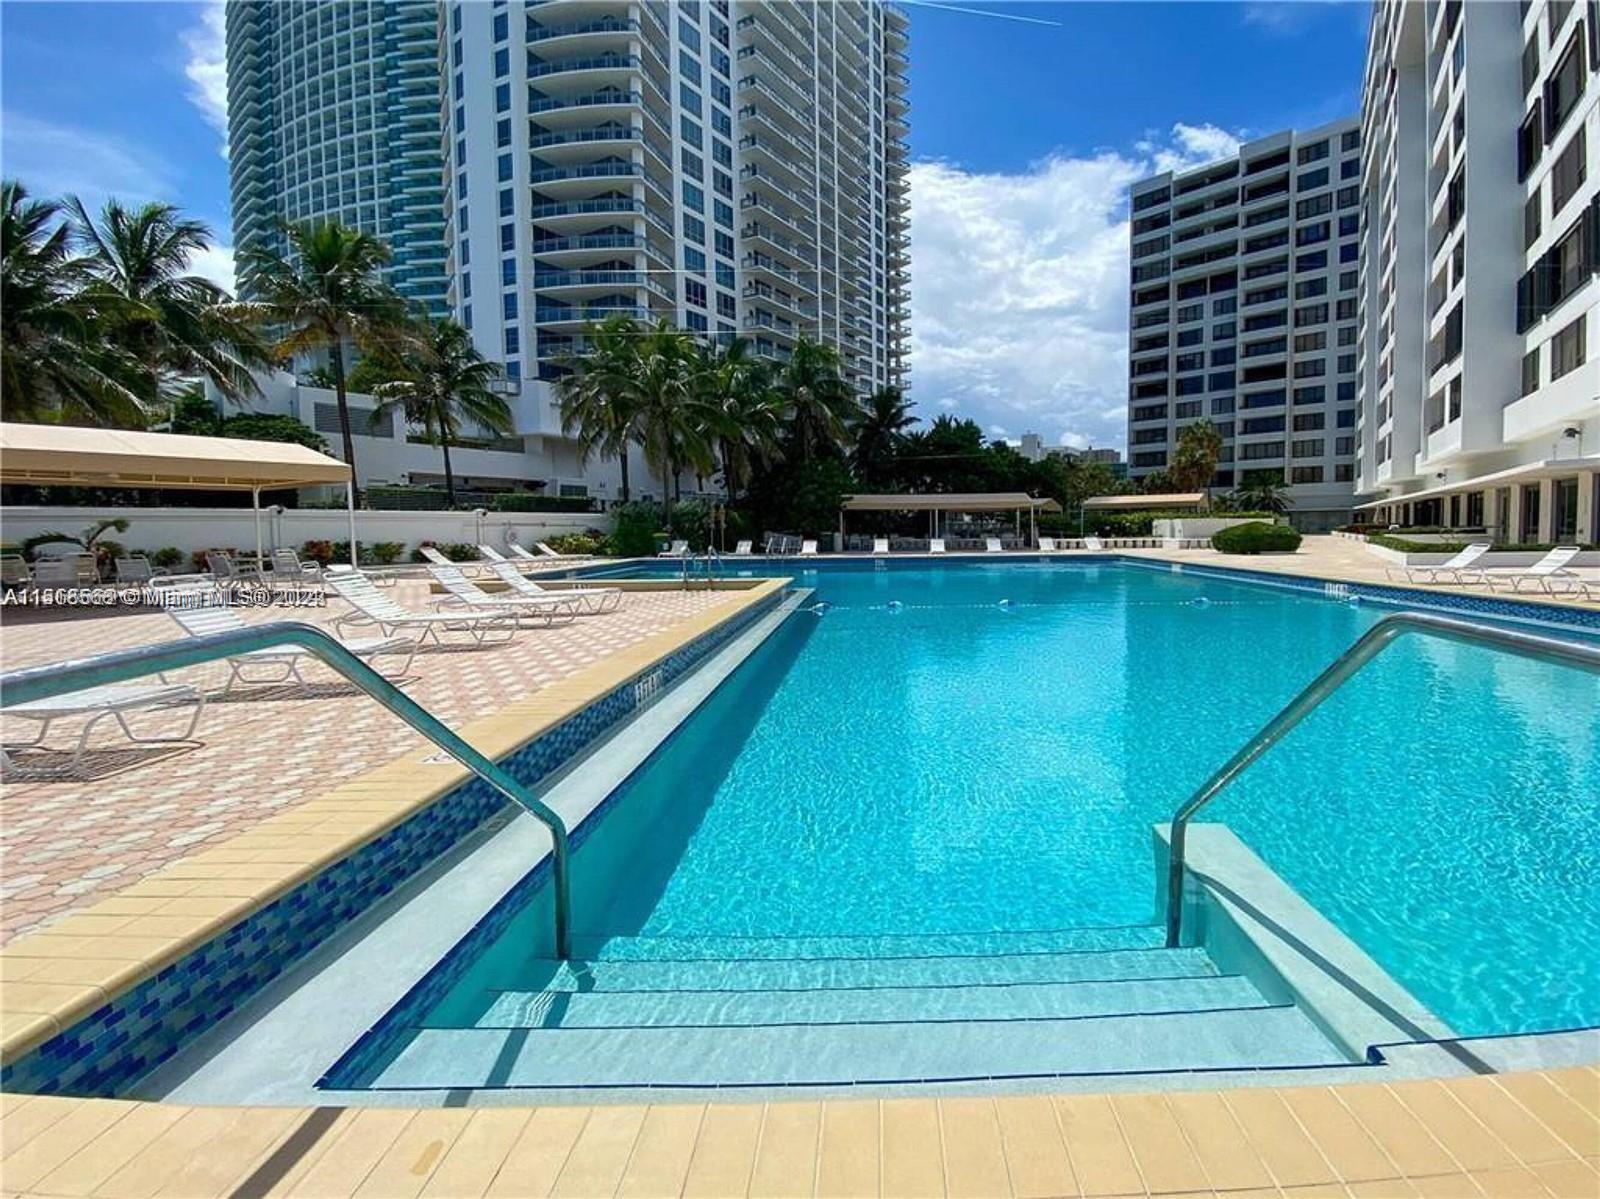 Photo of 3505 S Ocean Dr #905 in Hollywood, FL